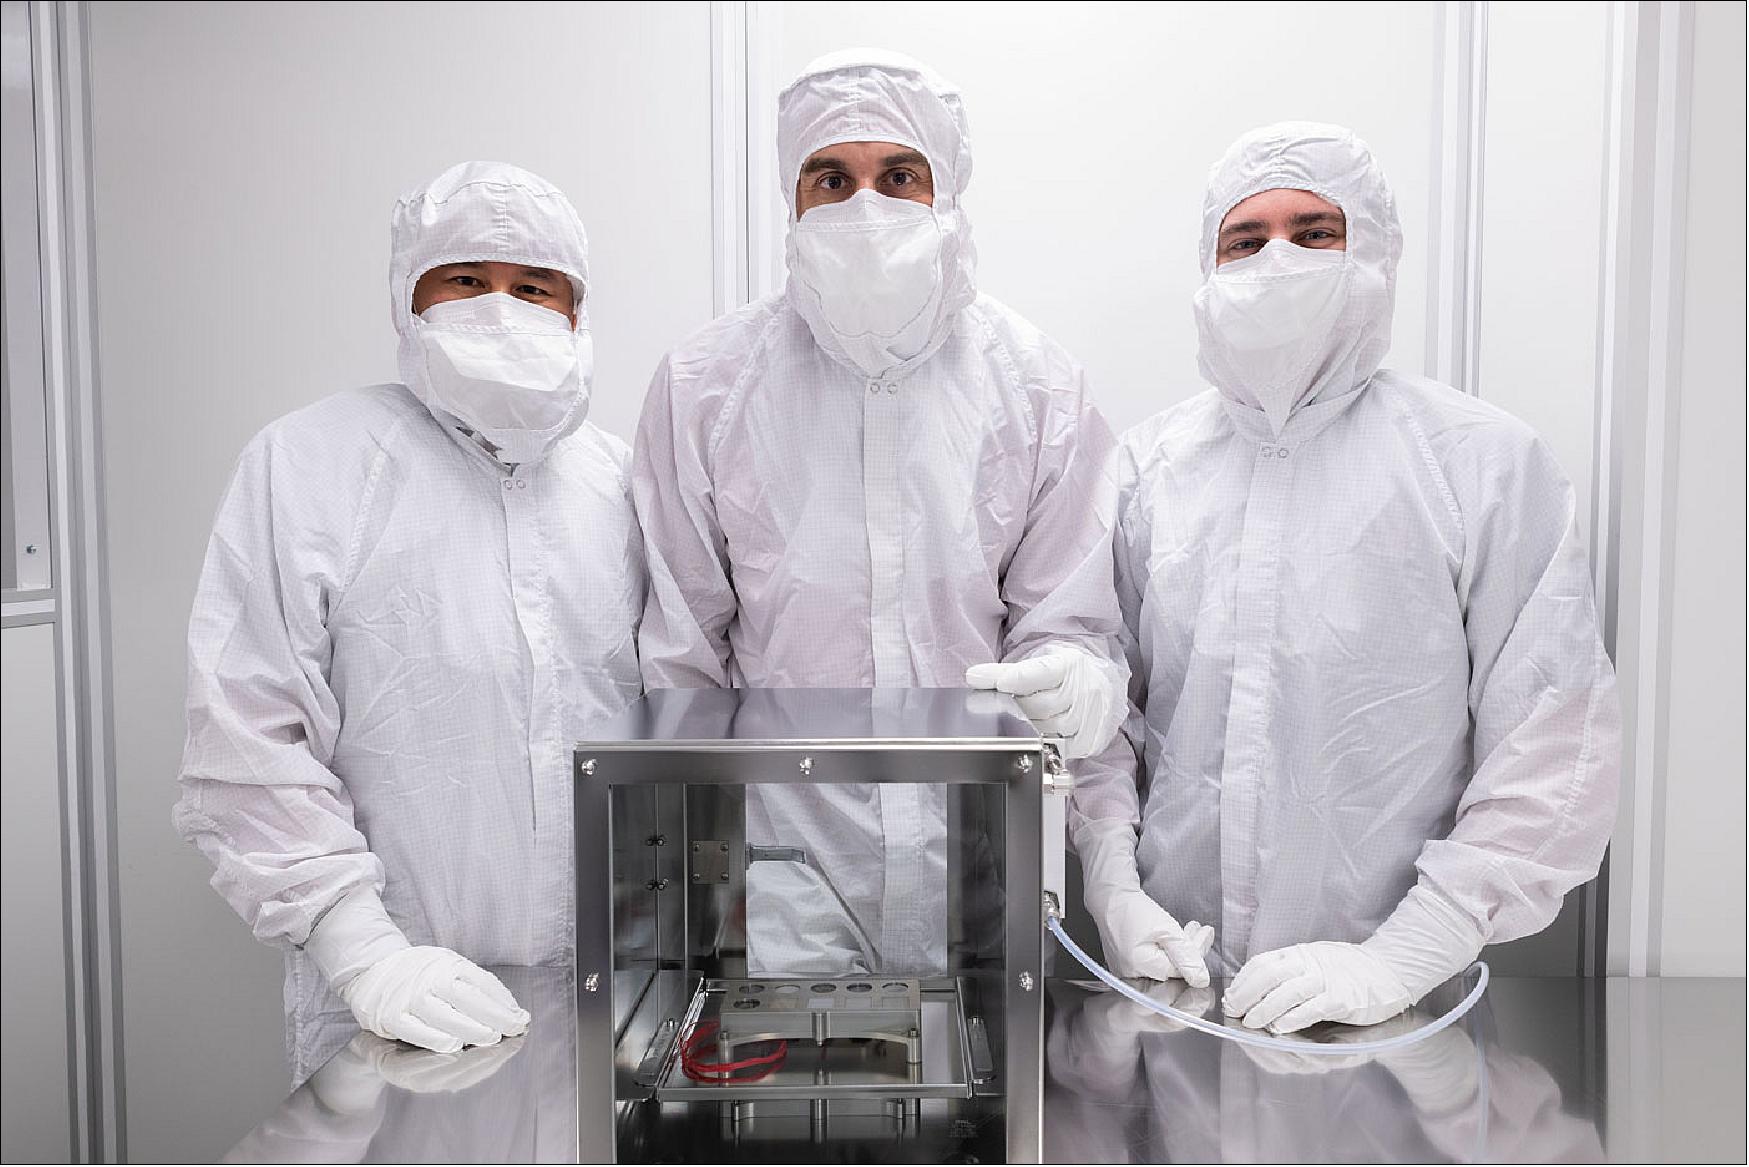 Figure 30: Image of engineers with the Mars 2020 SHERLOC Calibration Target in a clean room at NASA/JSC (Johnson Space Center). This is the first Mars flight hardware that has been designed, assembled & tested at NASA/JSC, led by Jacobs/JETS Chief Scientist Trevor Graff. It will carry the first space suit materials to Mars and will carry a piece of a martian meteorite back to the surface of Mars (image credit: NASA/JSC) 33)